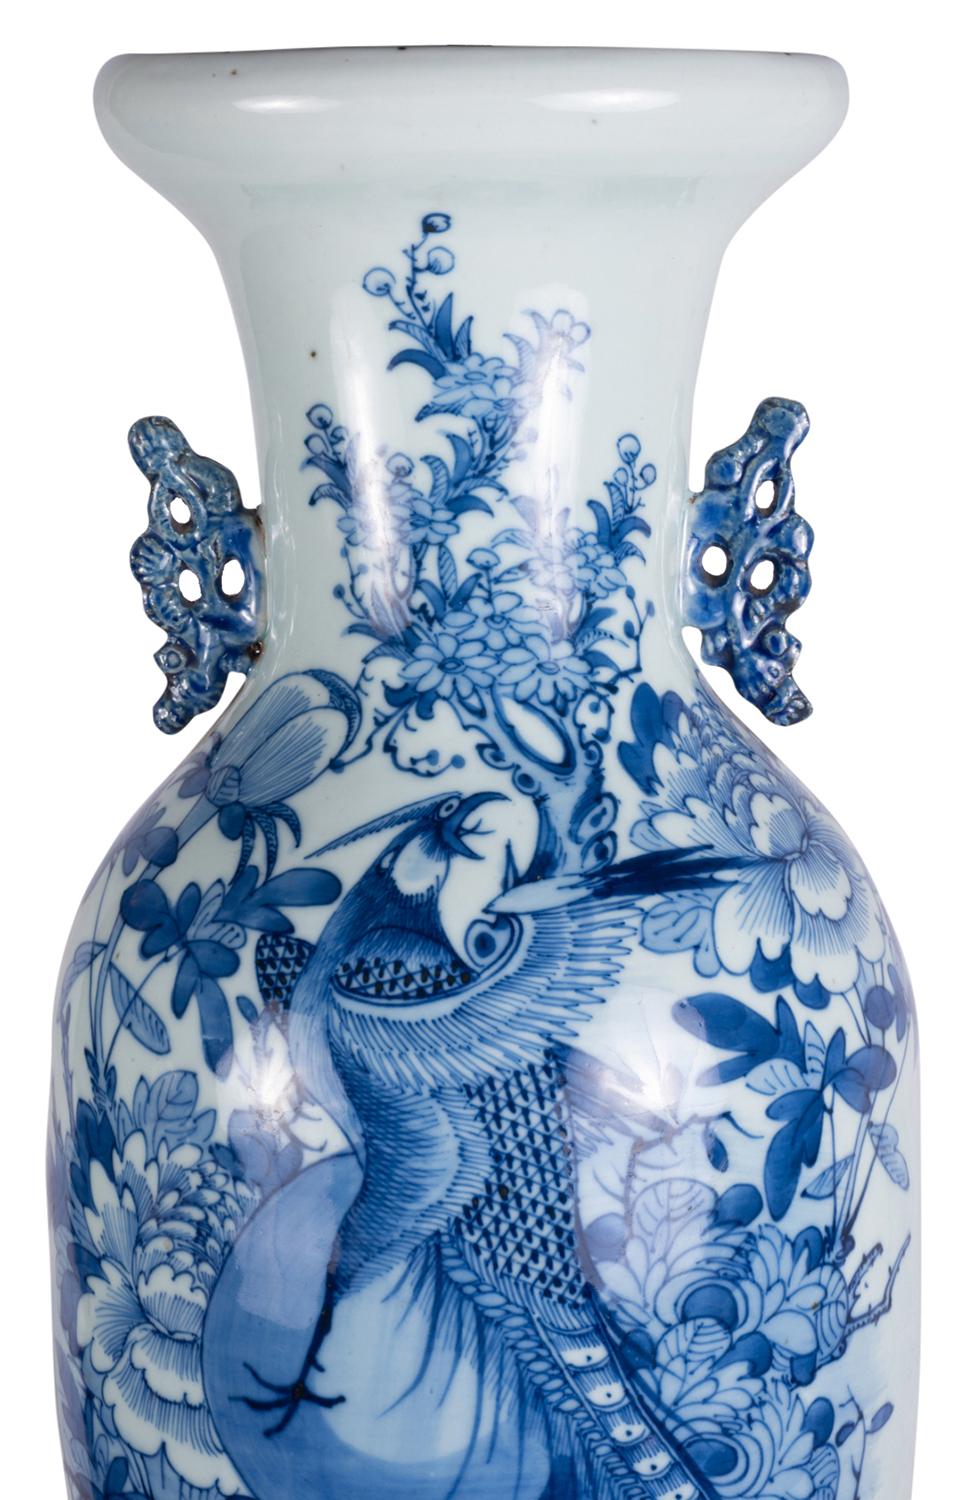 A very decorative 19th century Chinese blue and white vase or lamp, having a white ground with blue hand painted scenes of exotic birds flowers and foliage, pierced porcelain handles to either side and raised on a wooden base.